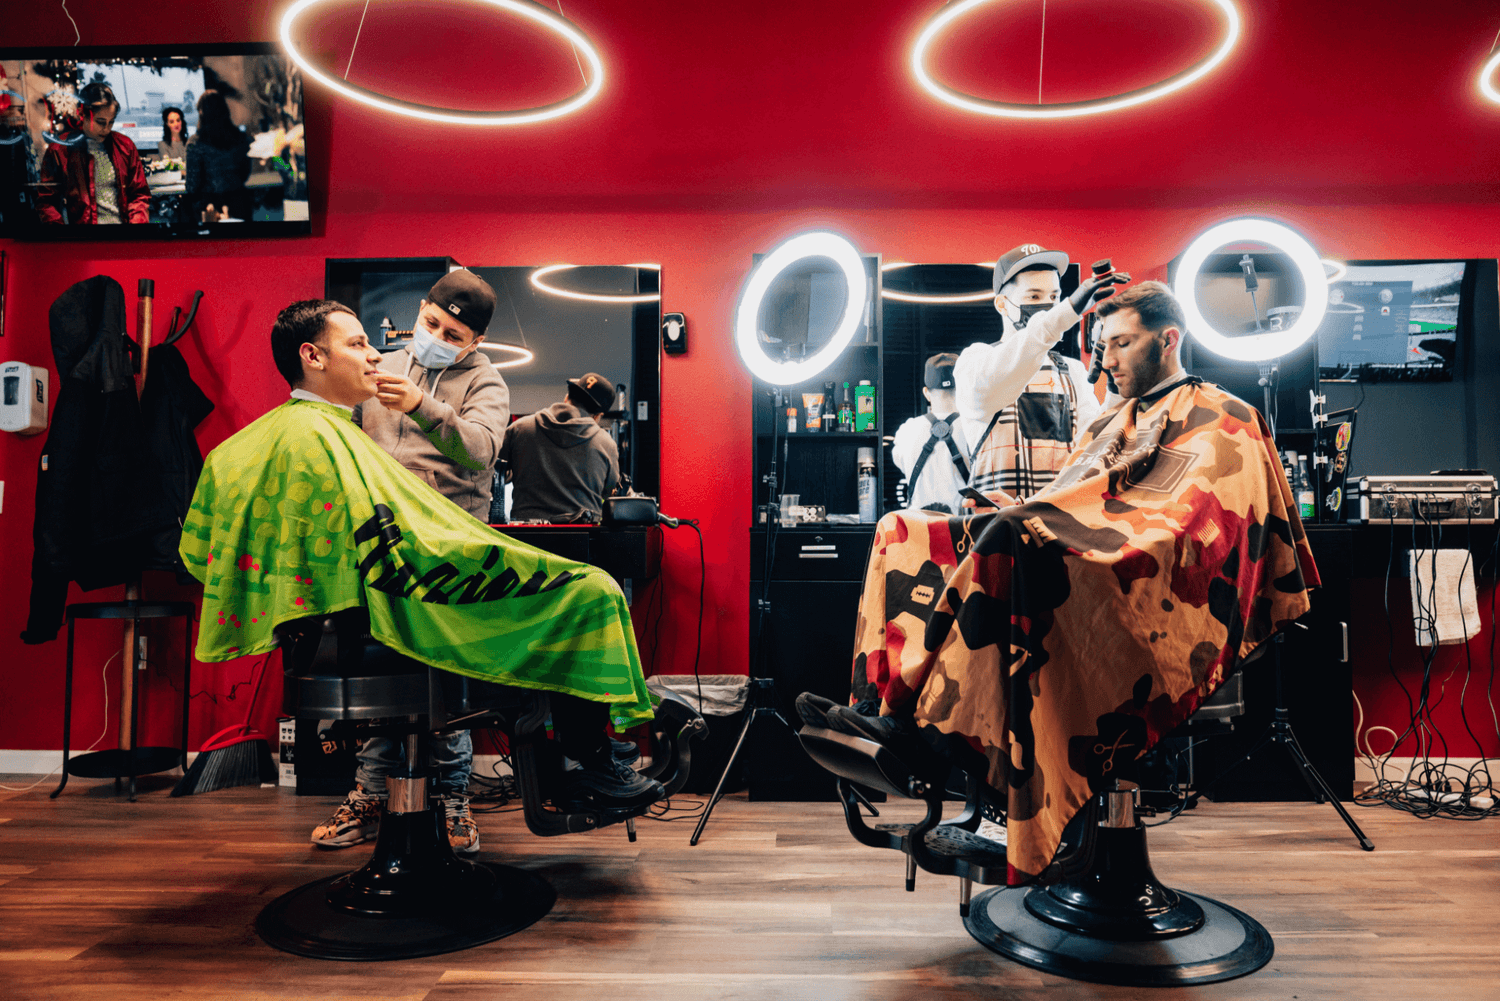 Two barbers cutting hair with white bright lights behind them.